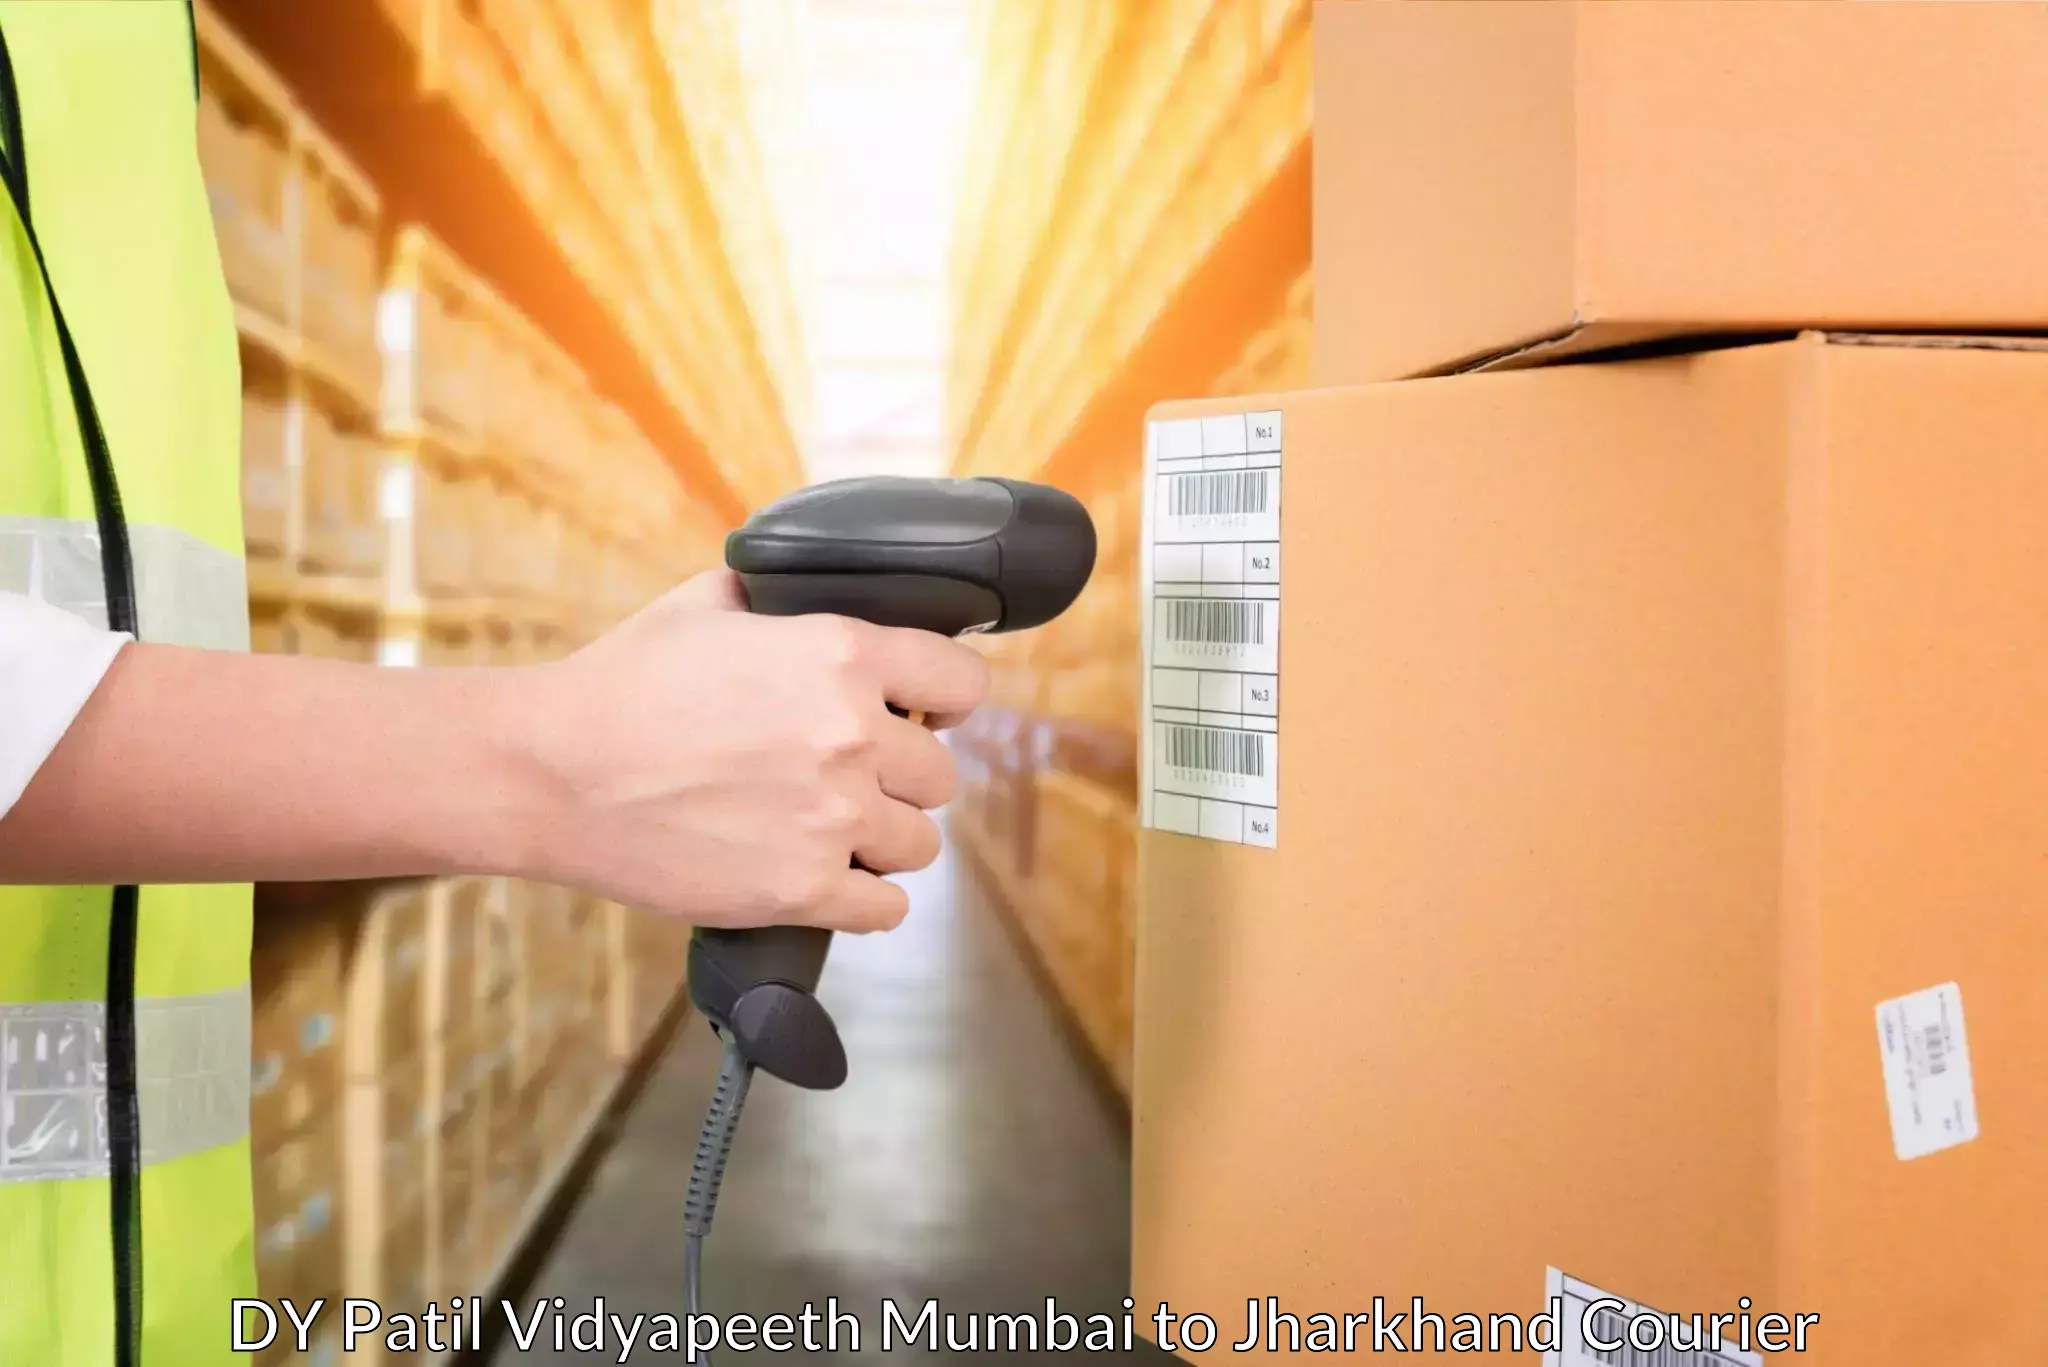 Express delivery solutions DY Patil Vidyapeeth Mumbai to Koderma